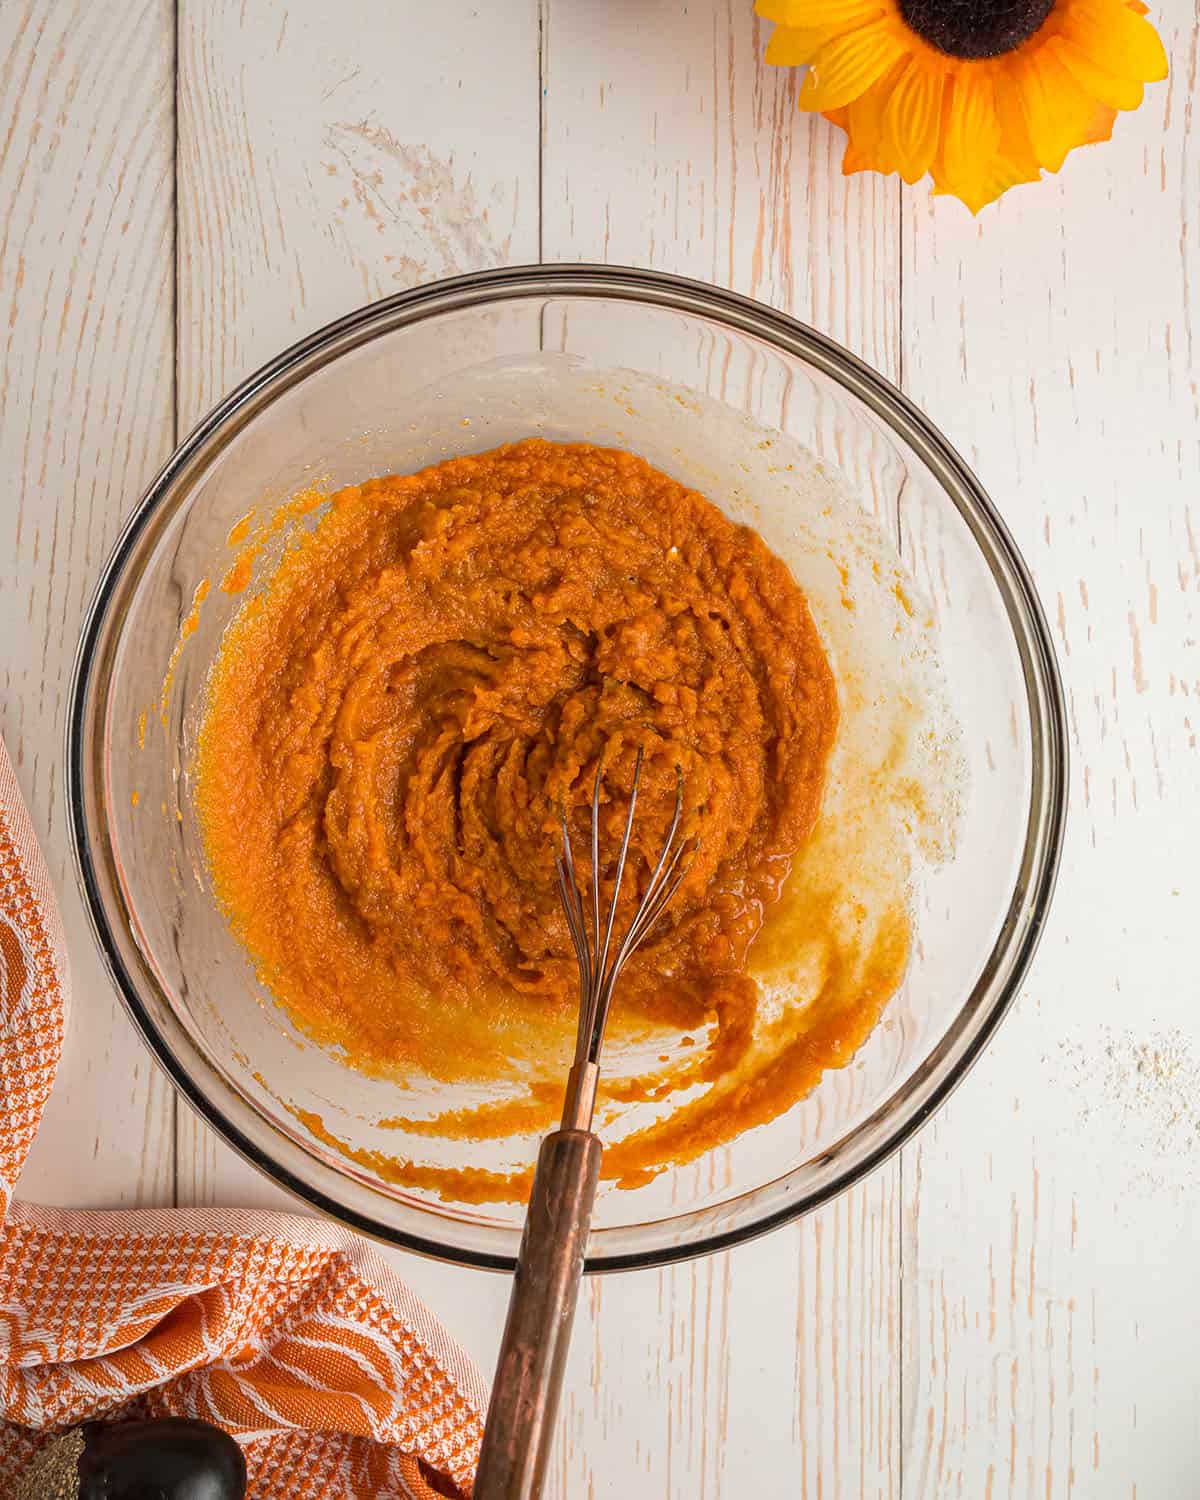 Wet ingredients for pumpkin cornbread being whisked together in a clear bowl, top view.  